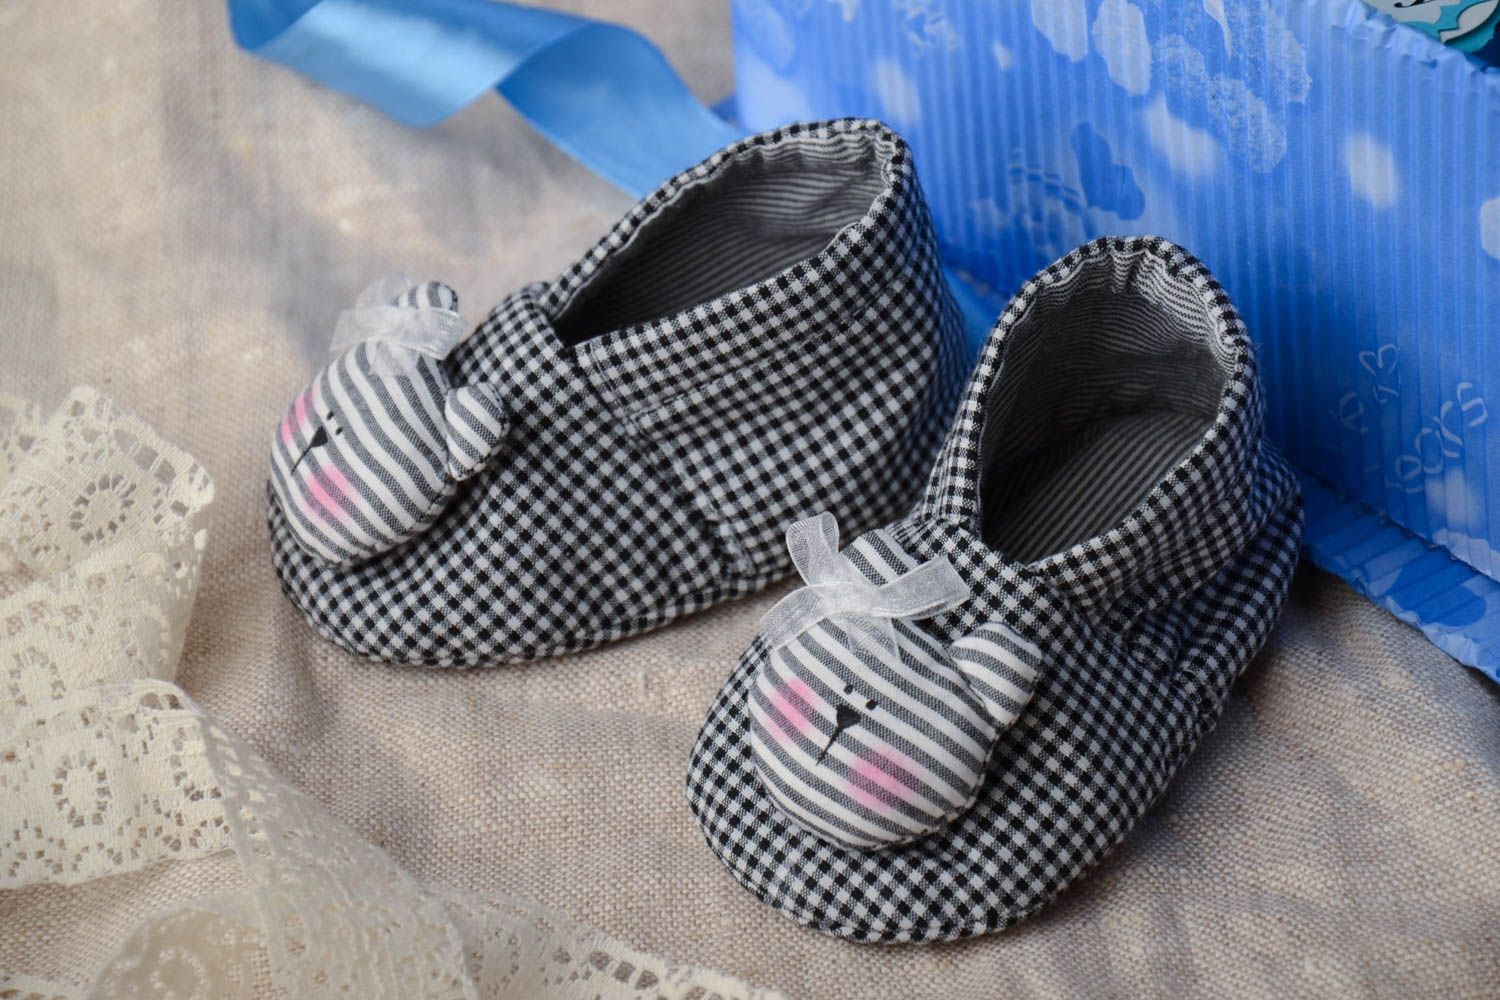 Handmade baby shoes sewn of checkered cotton fabric with metal buttons Bears photo 1